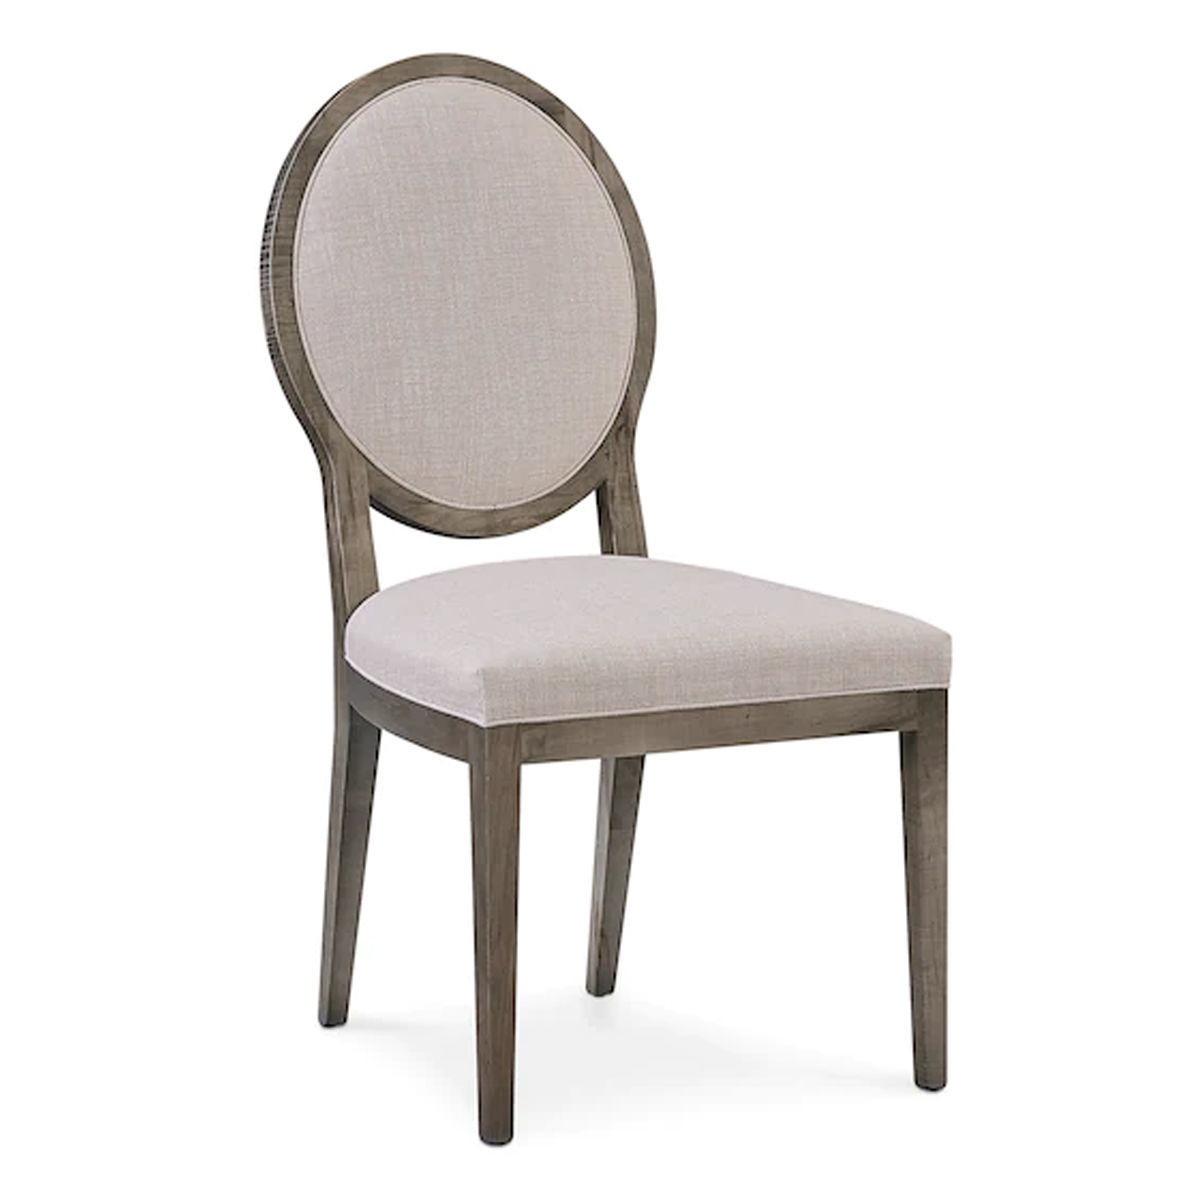 Picture of OSTROW UPH MAPLE SIDE CHAIR